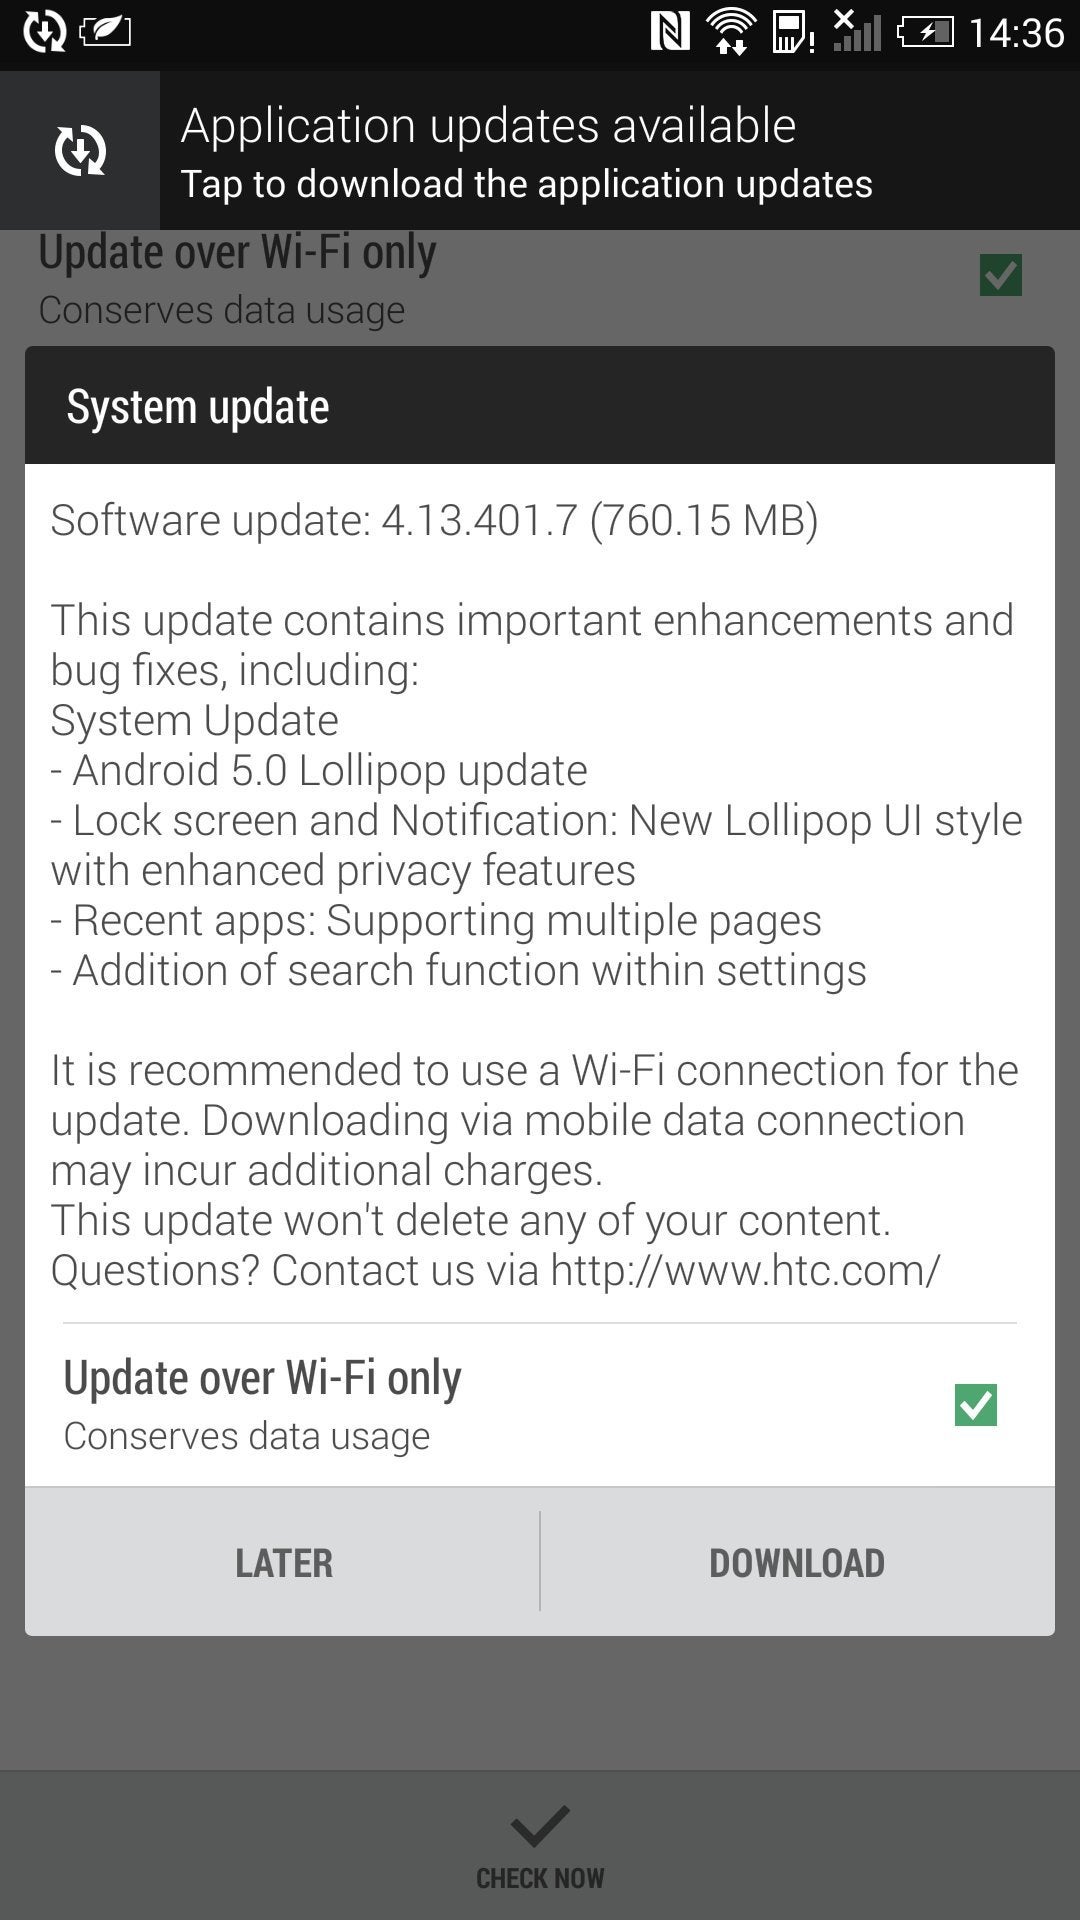 HTC One Max now getting its Android Lollipop update in some regions